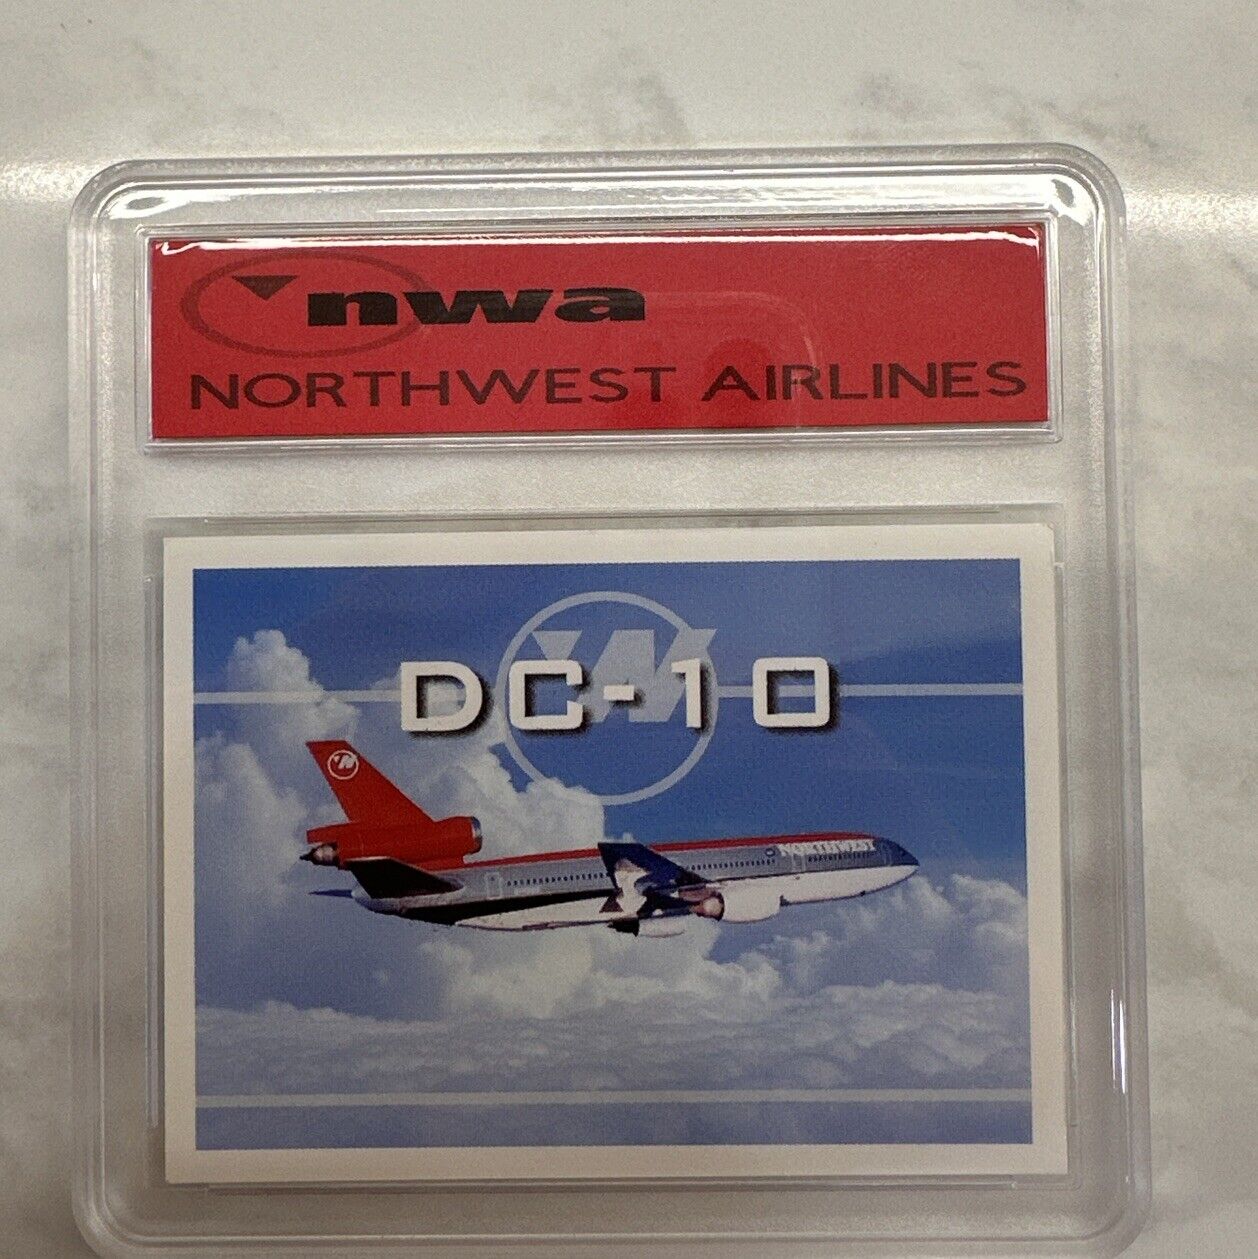 NORTHWEST AIRLINES PILOT CARD RARE MD DC-10 1990s HARD CASE MINT NEW FAST SHIP